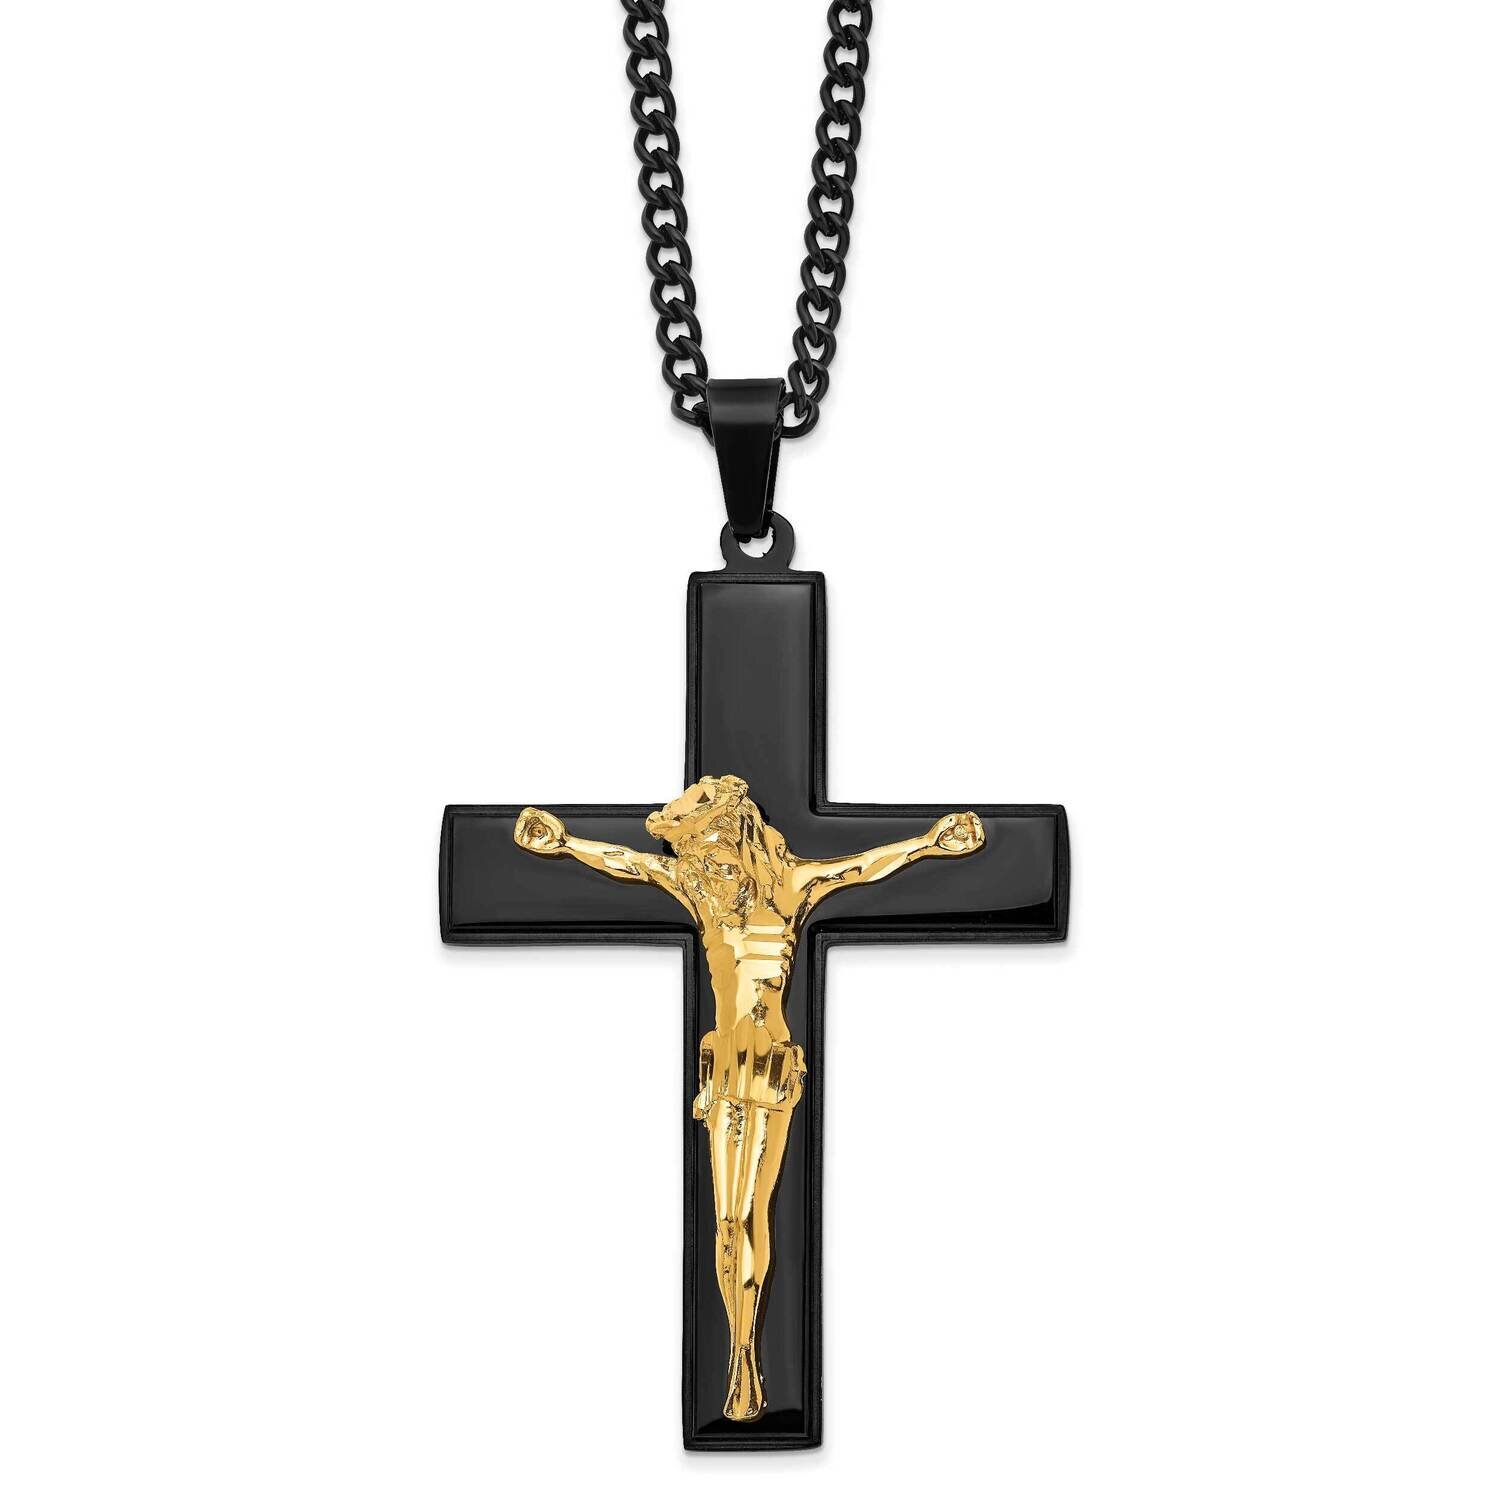 24 Inch Polished Black & Yellow Ip-Plated Crucifix Necklace Stainless Steel SRN2763-24